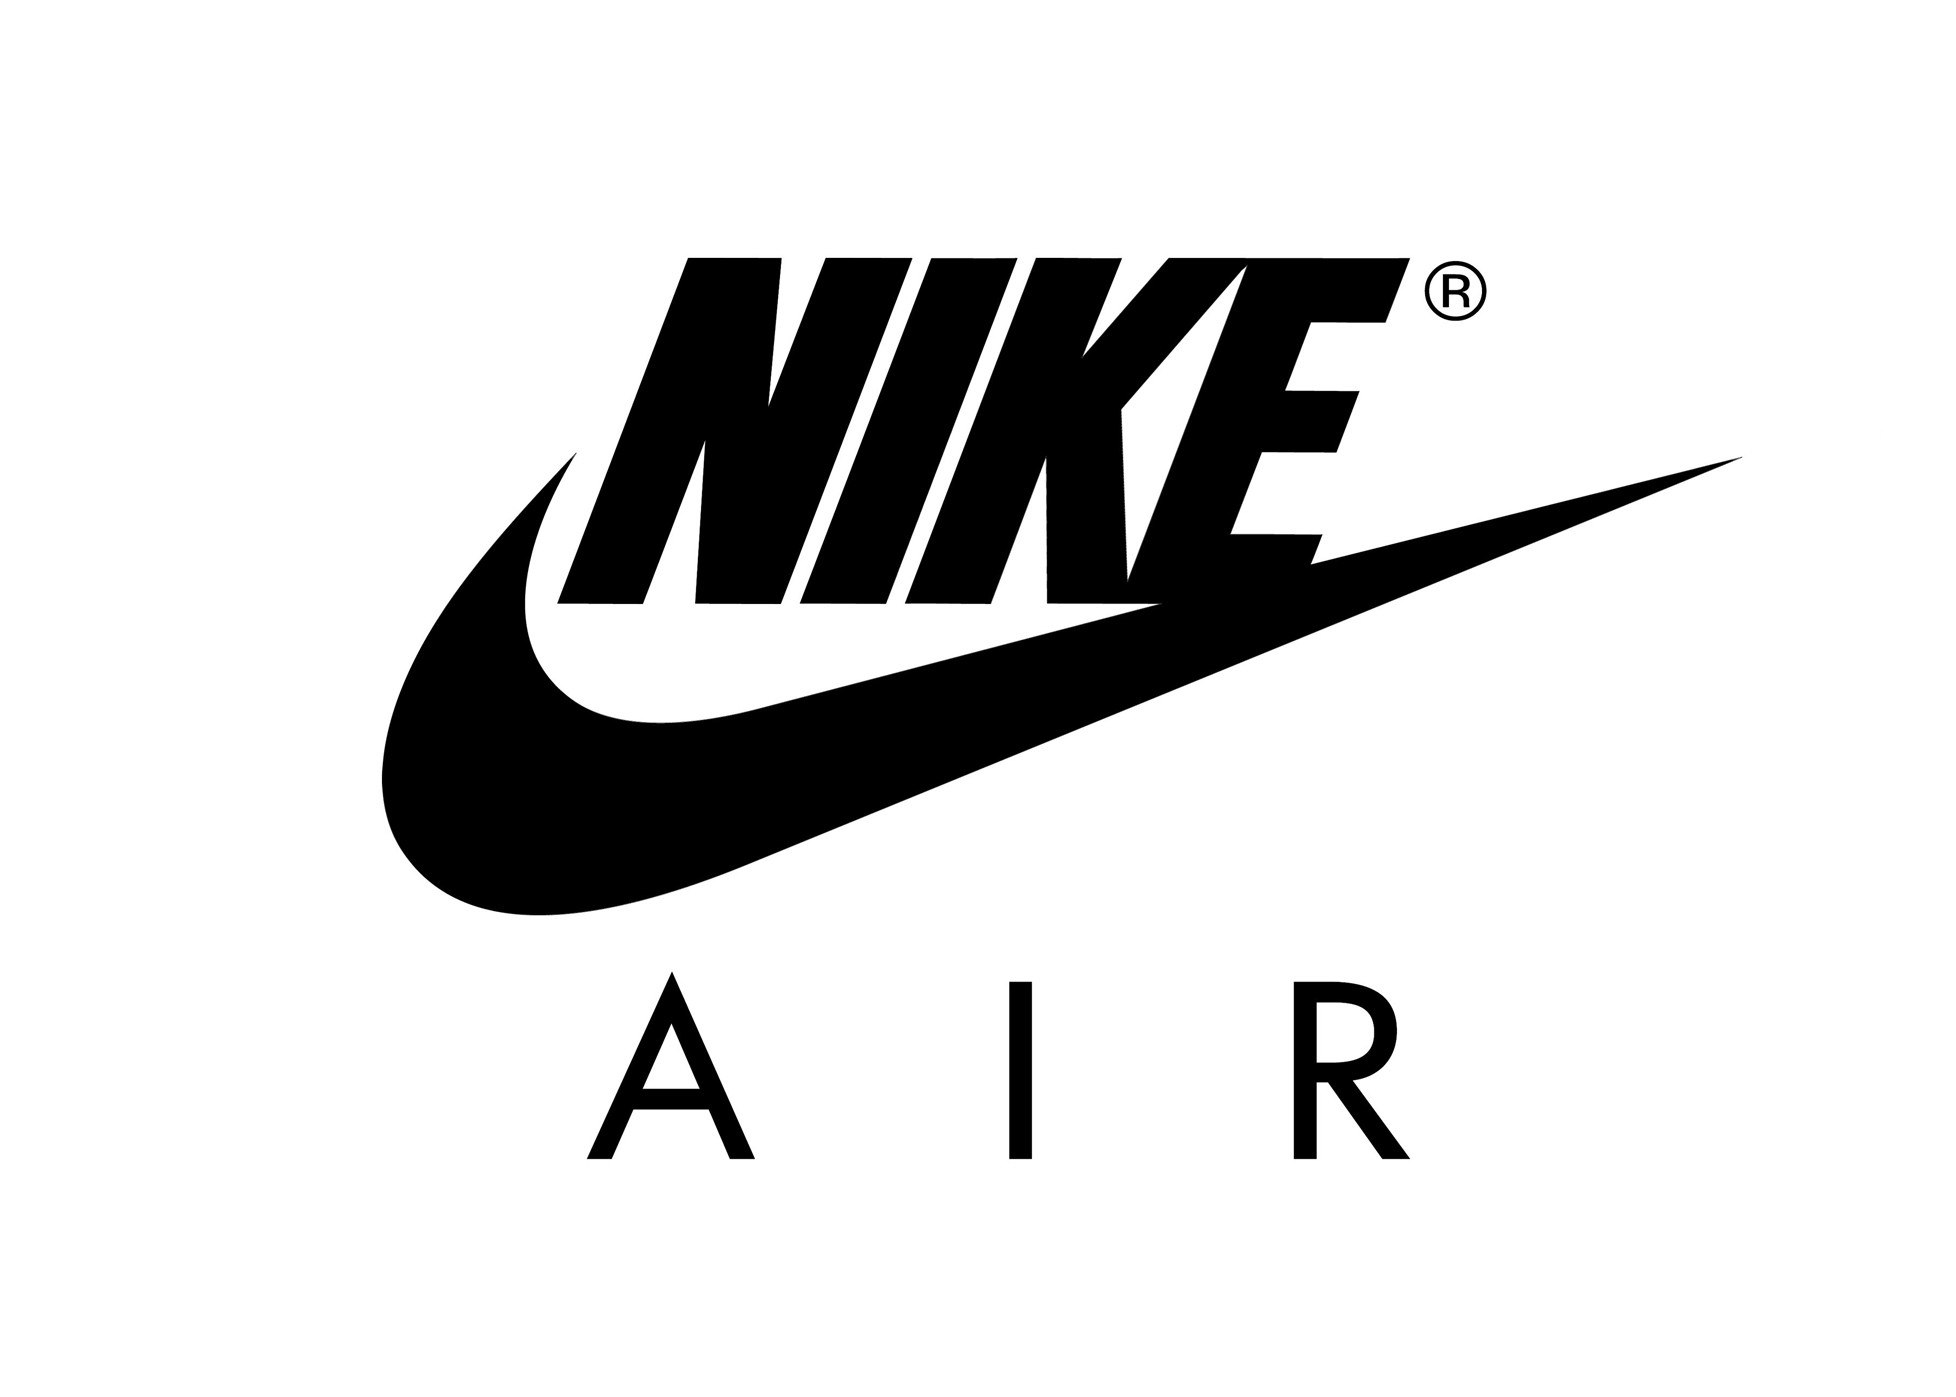 White Nike Wallpapers - Top Free White Nike Backgrounds - WallpaperAccess